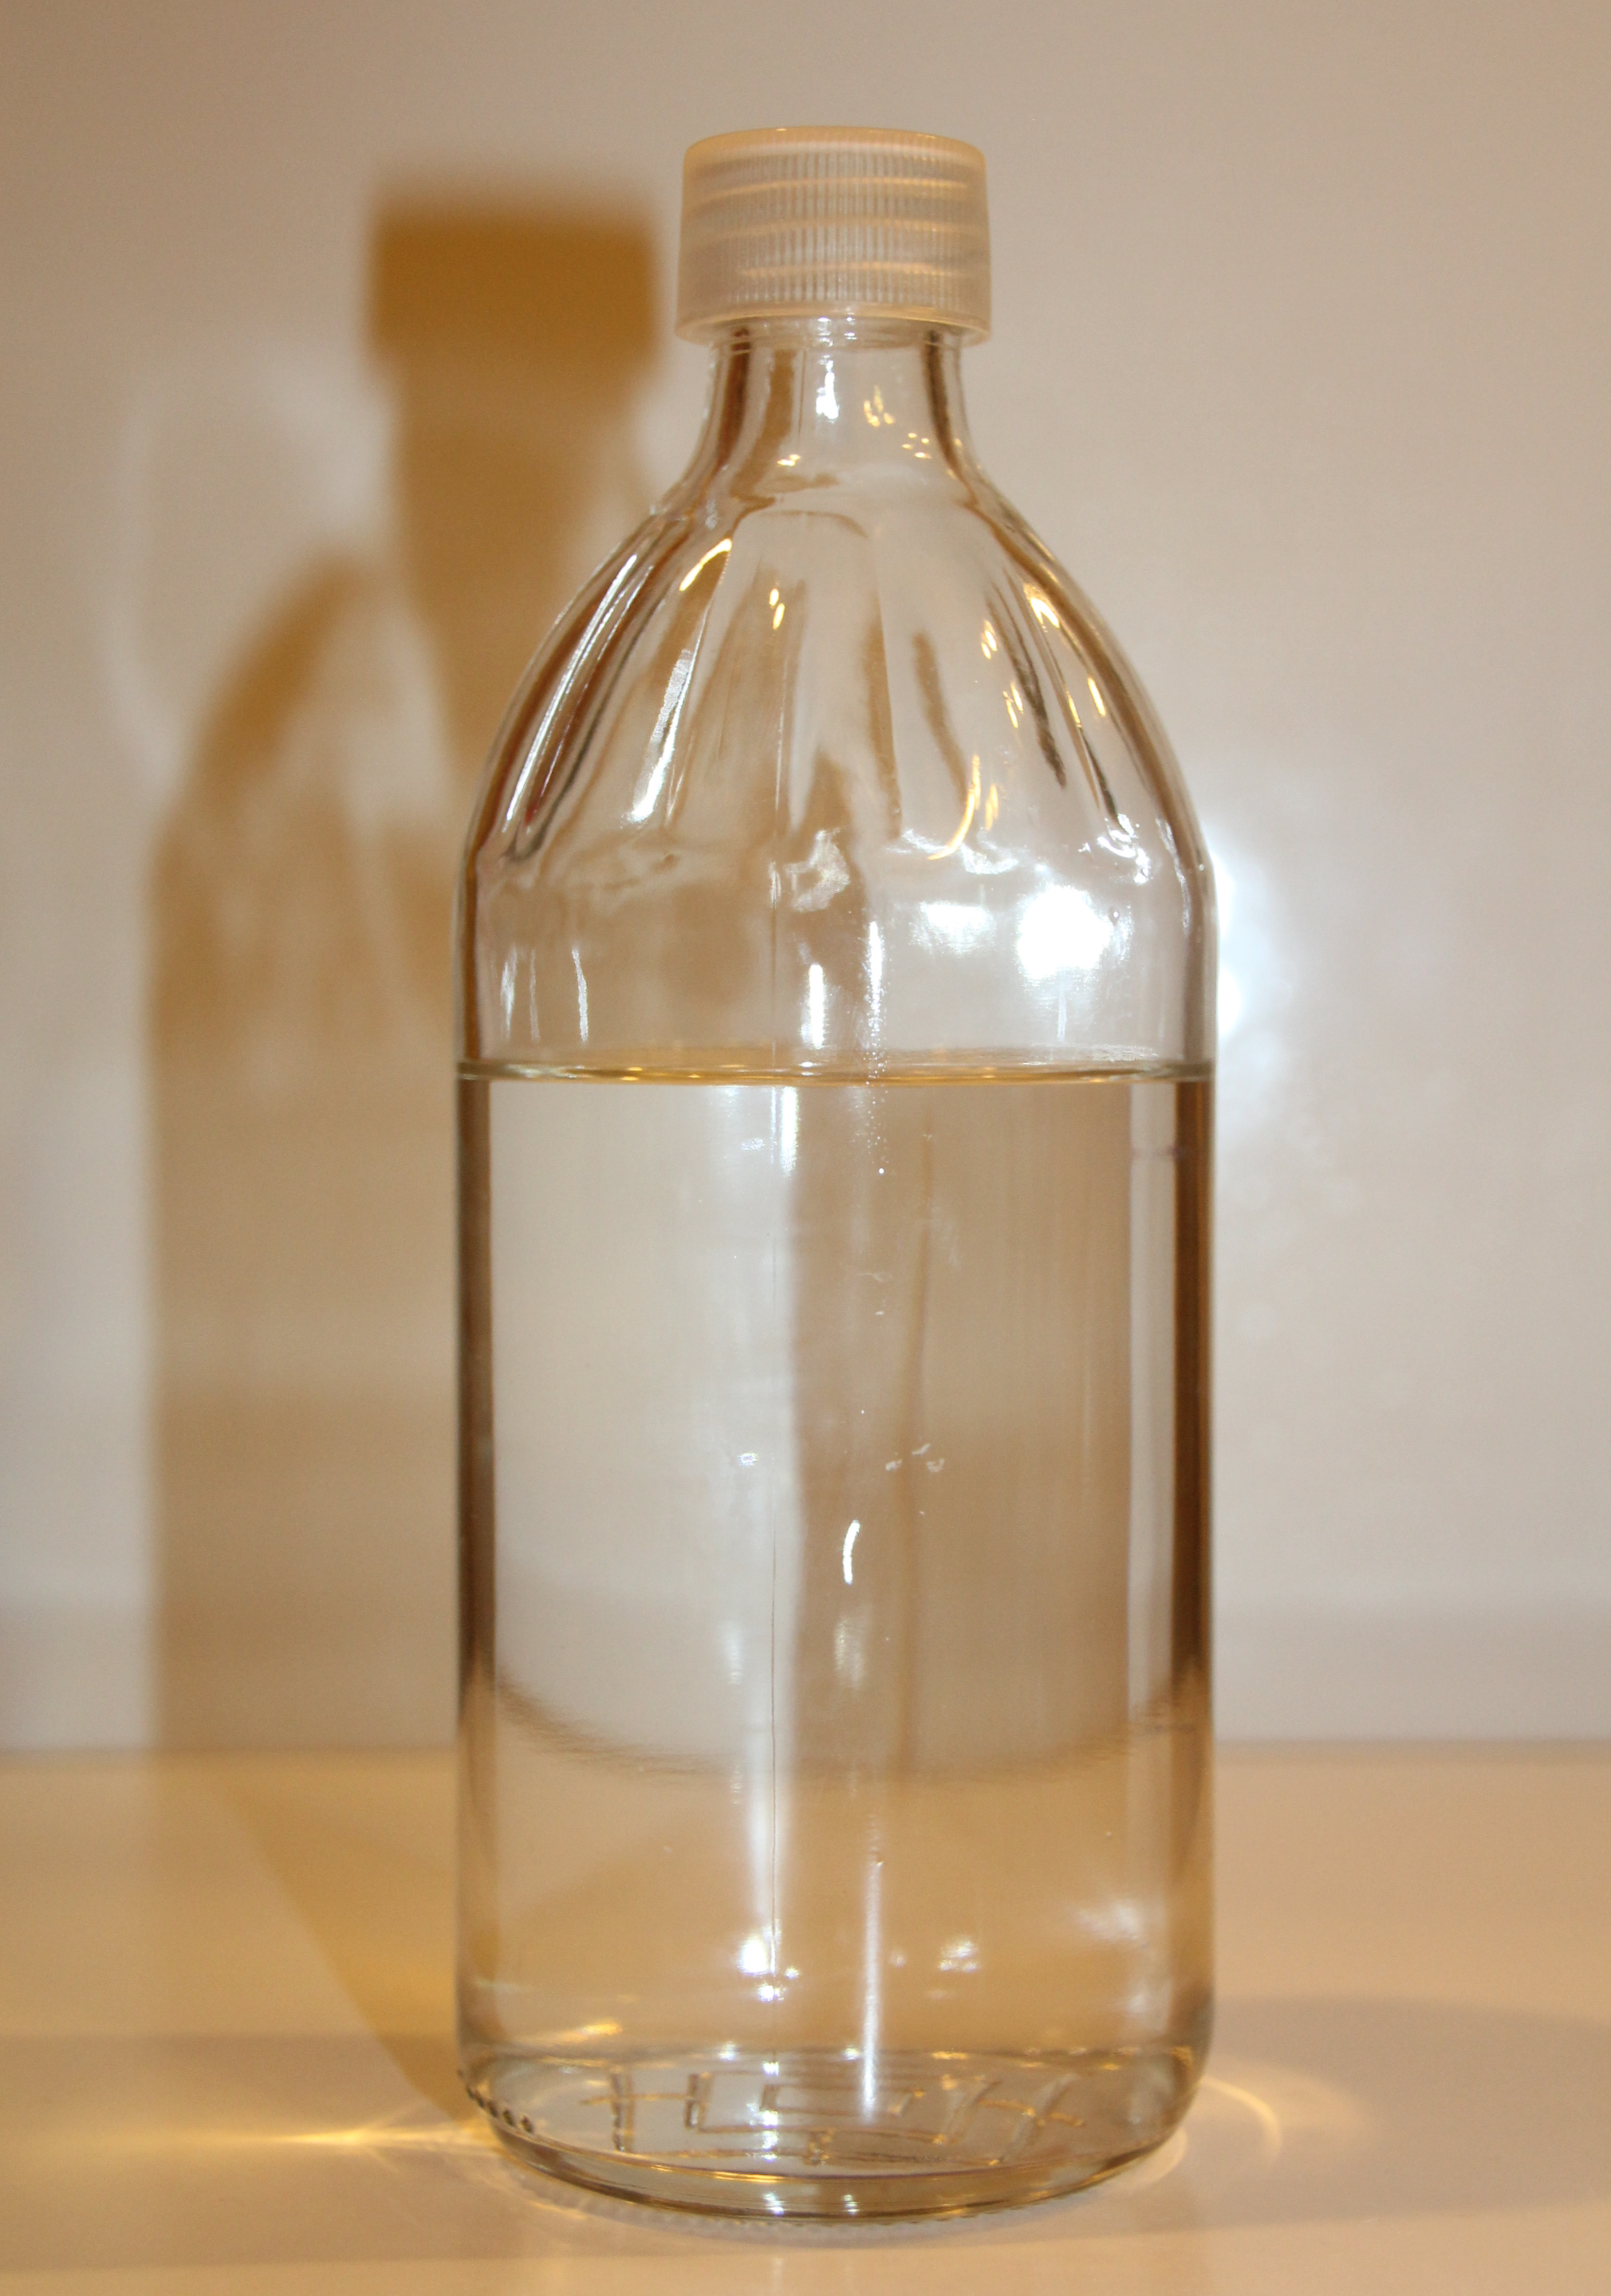 Sample of Absolute Ethanol